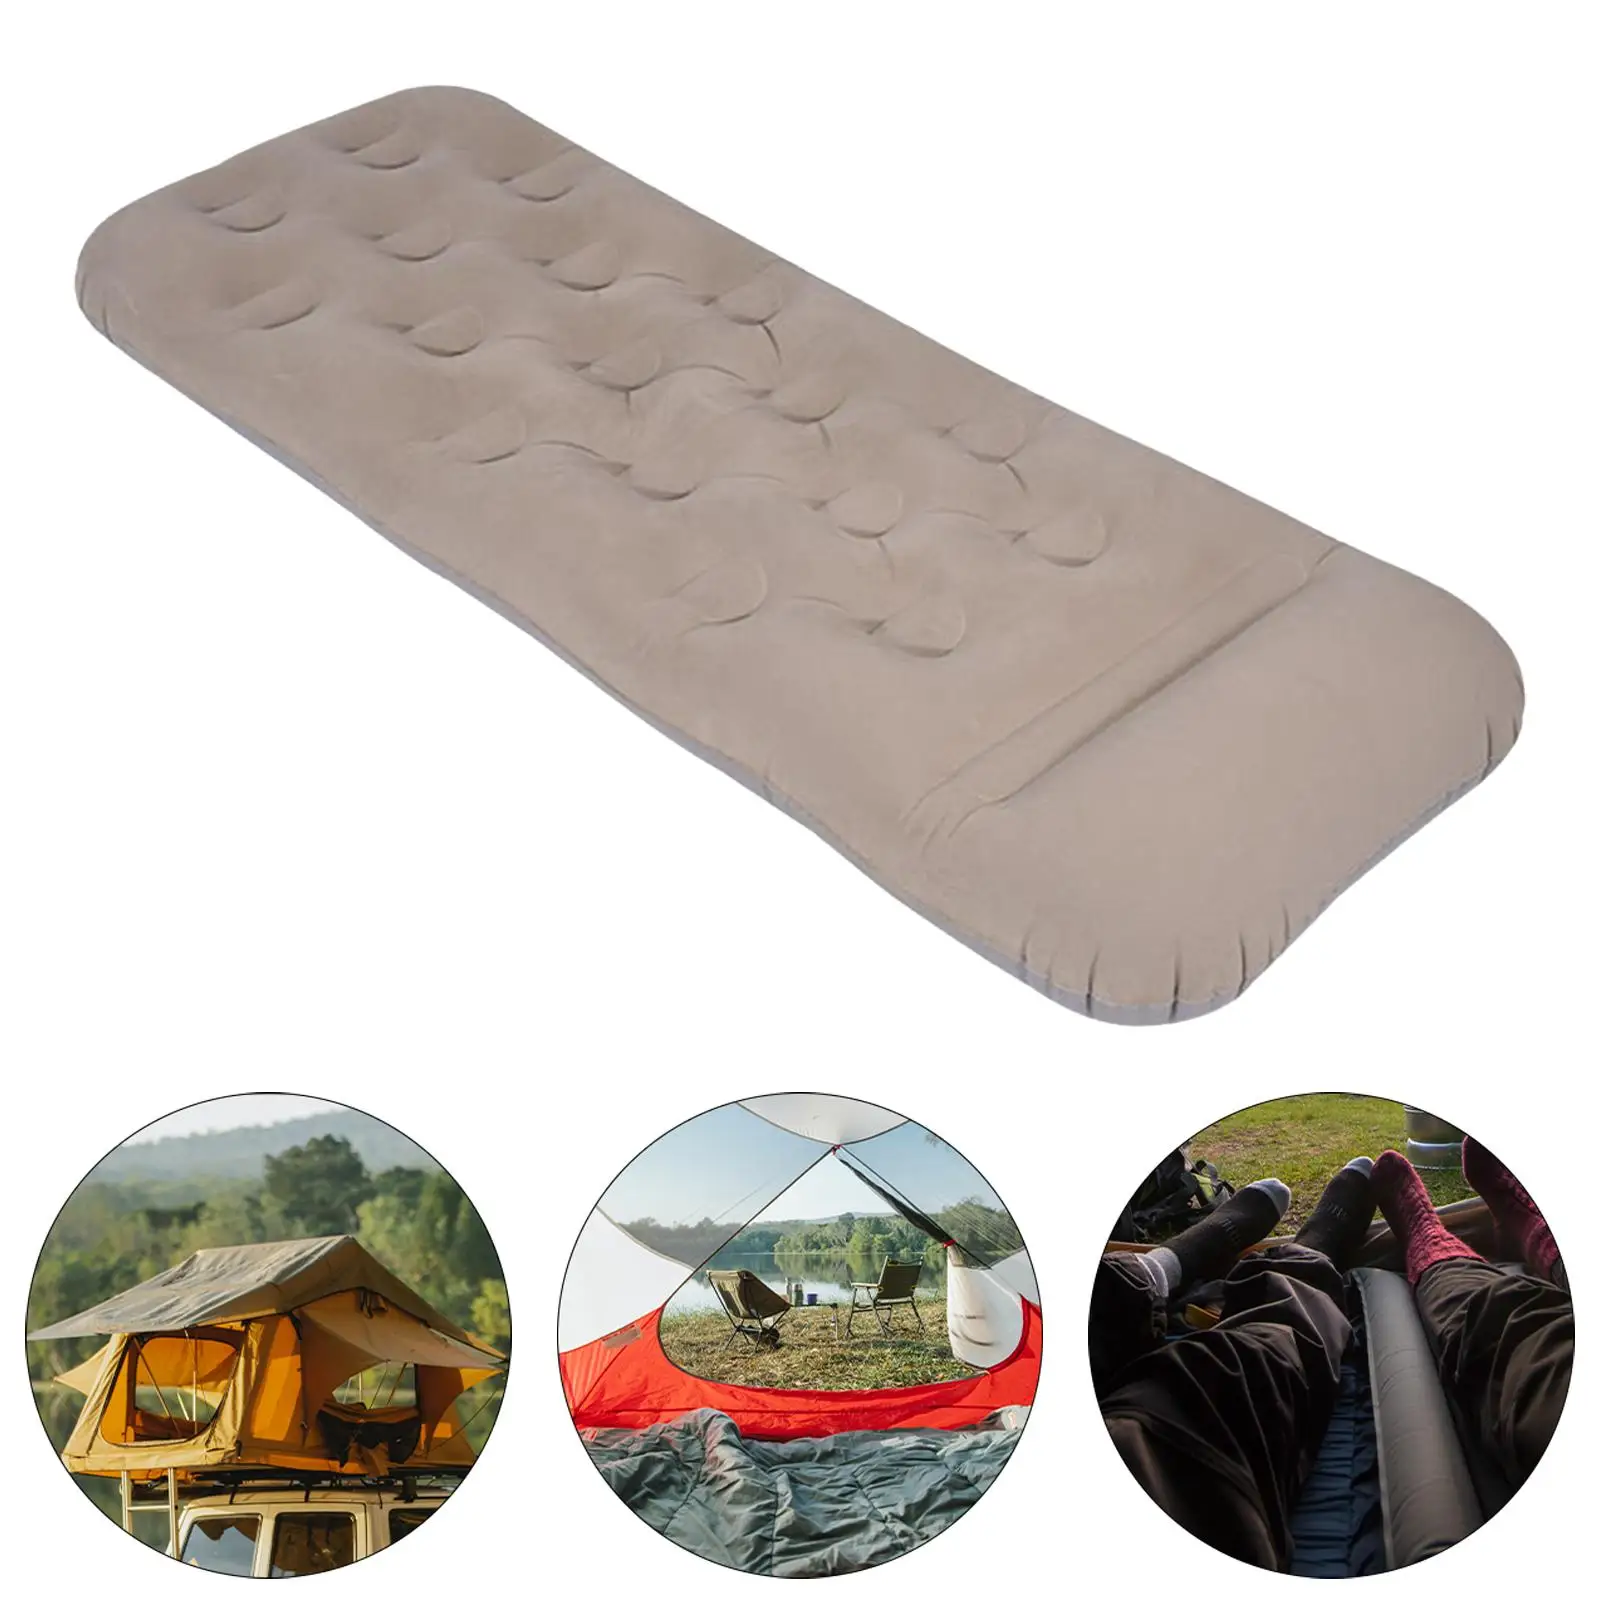 Air Mattress Flocking Top Portable Air Bed for Travel Indoor Outdoor Home